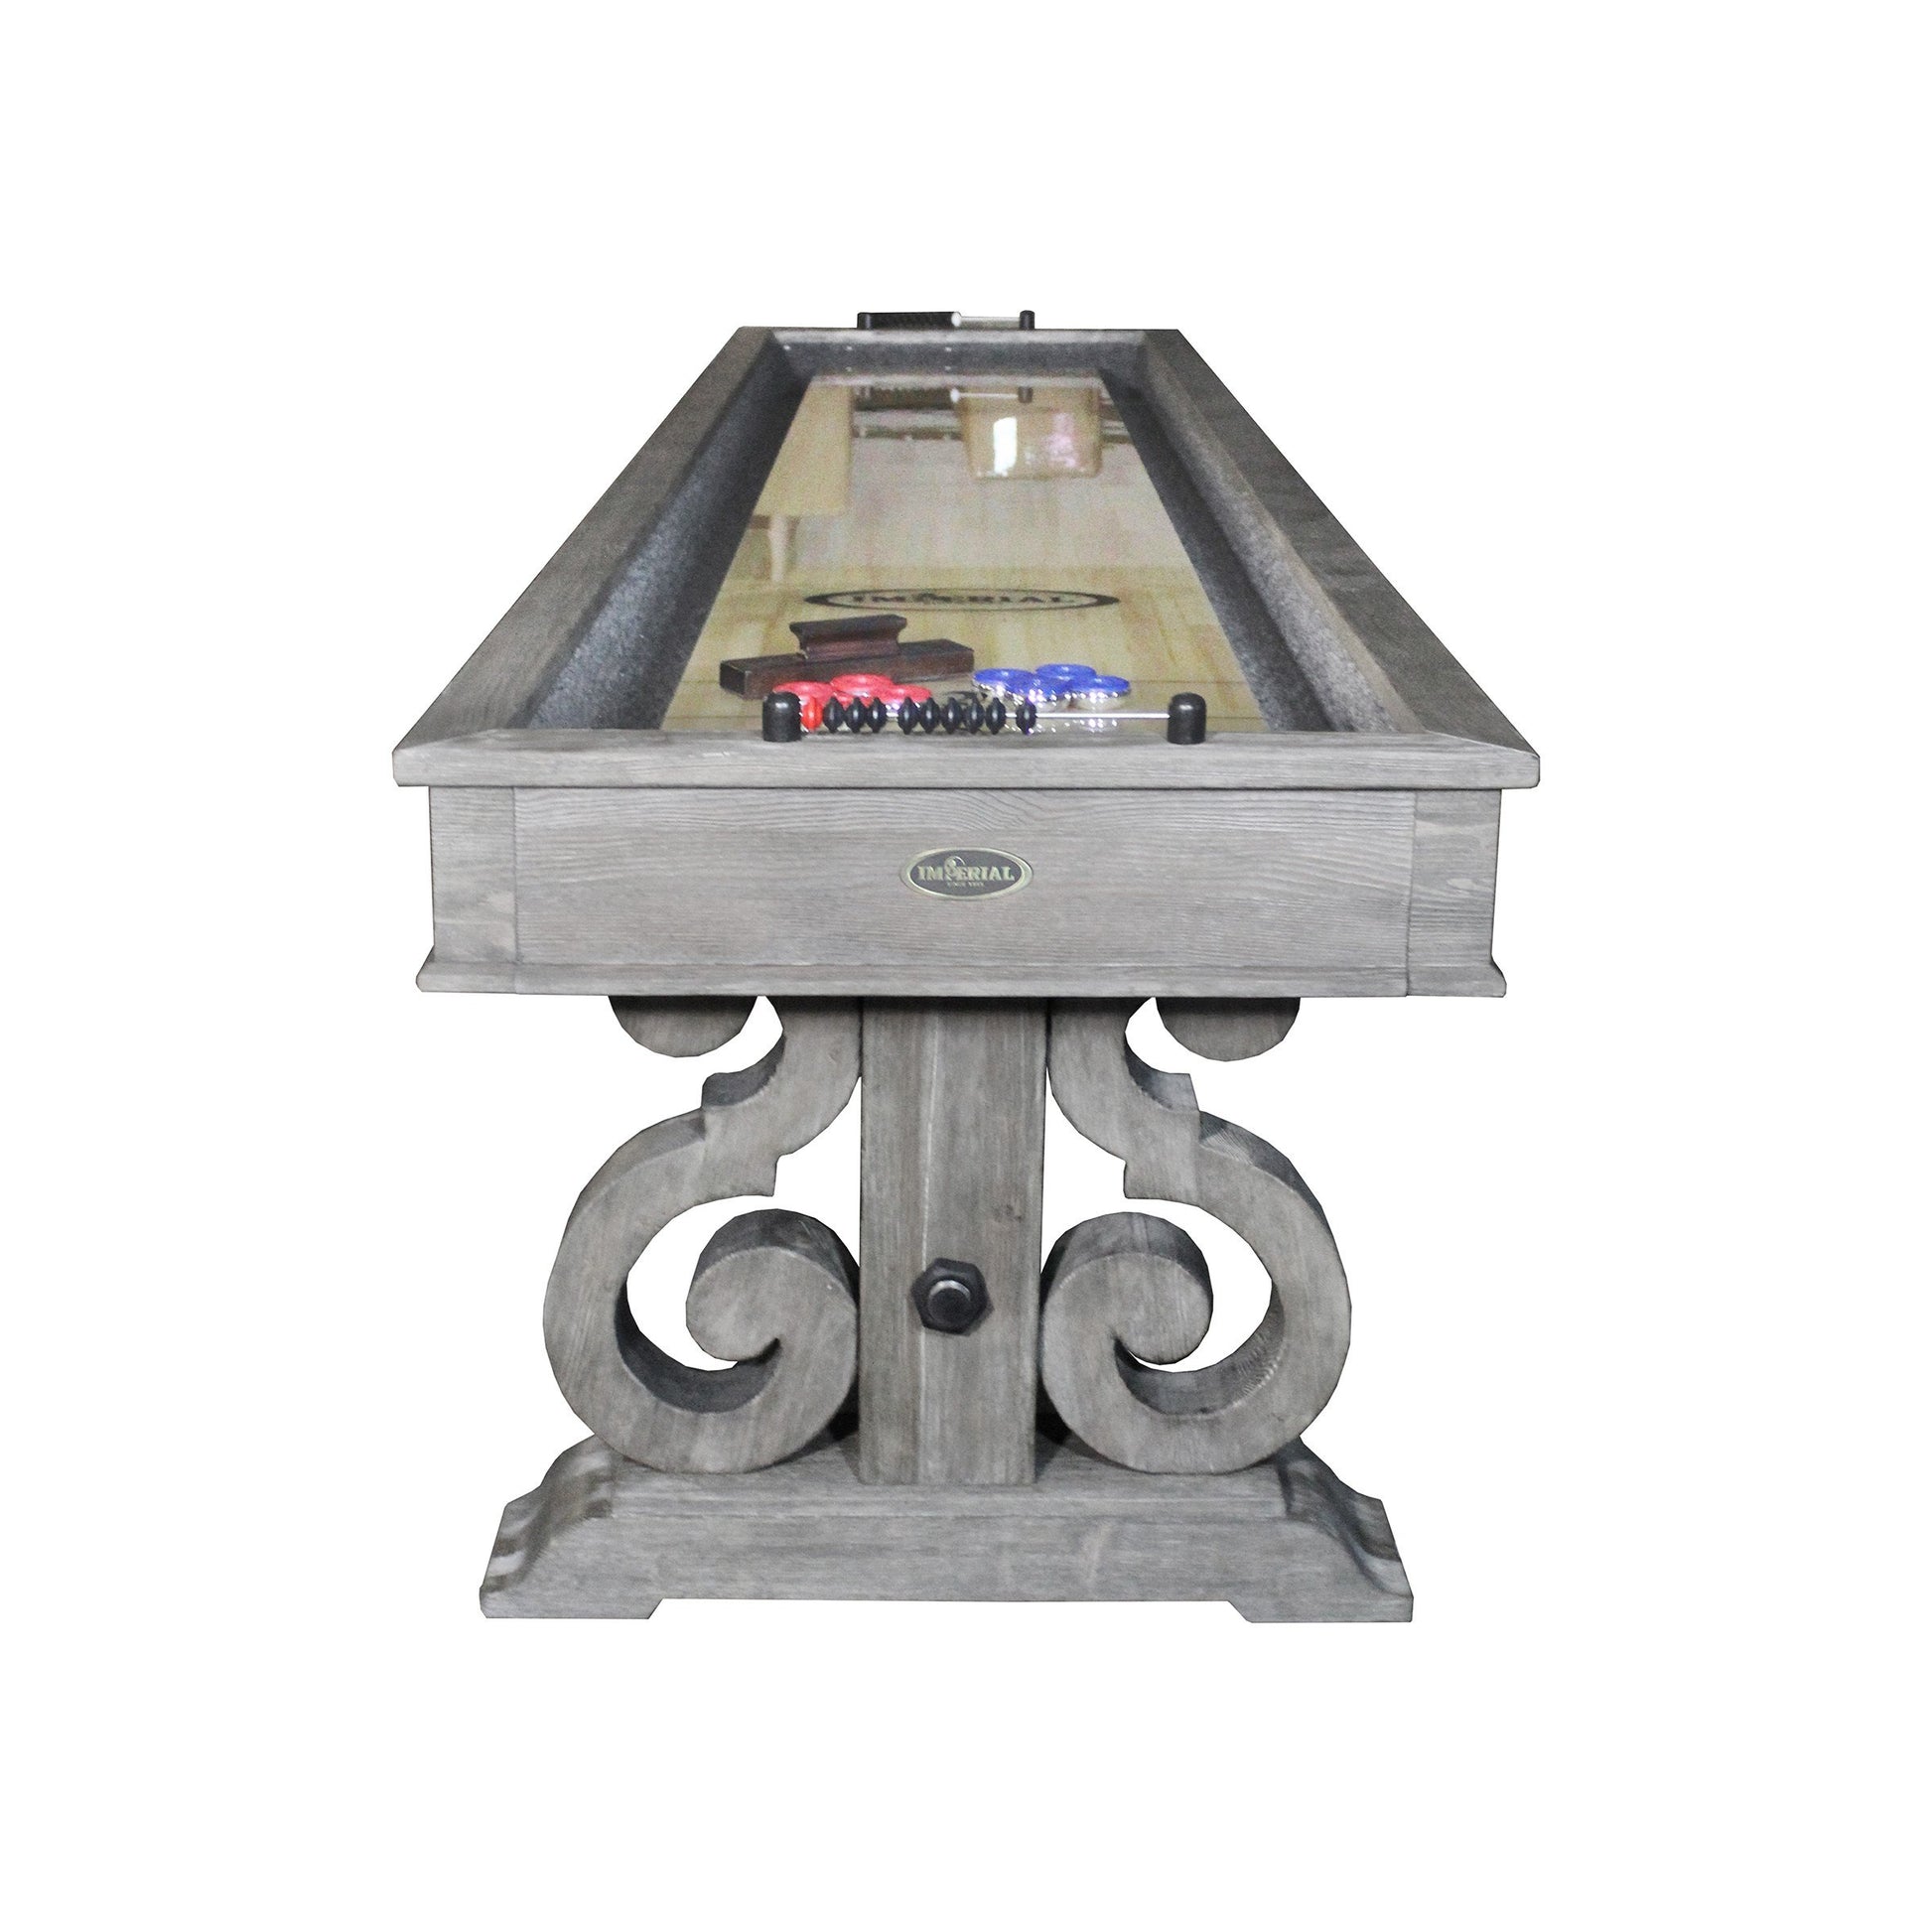 Imperial Barnstable 12ft Shuffleboard Table in Silver Mist - Gaming Blaze